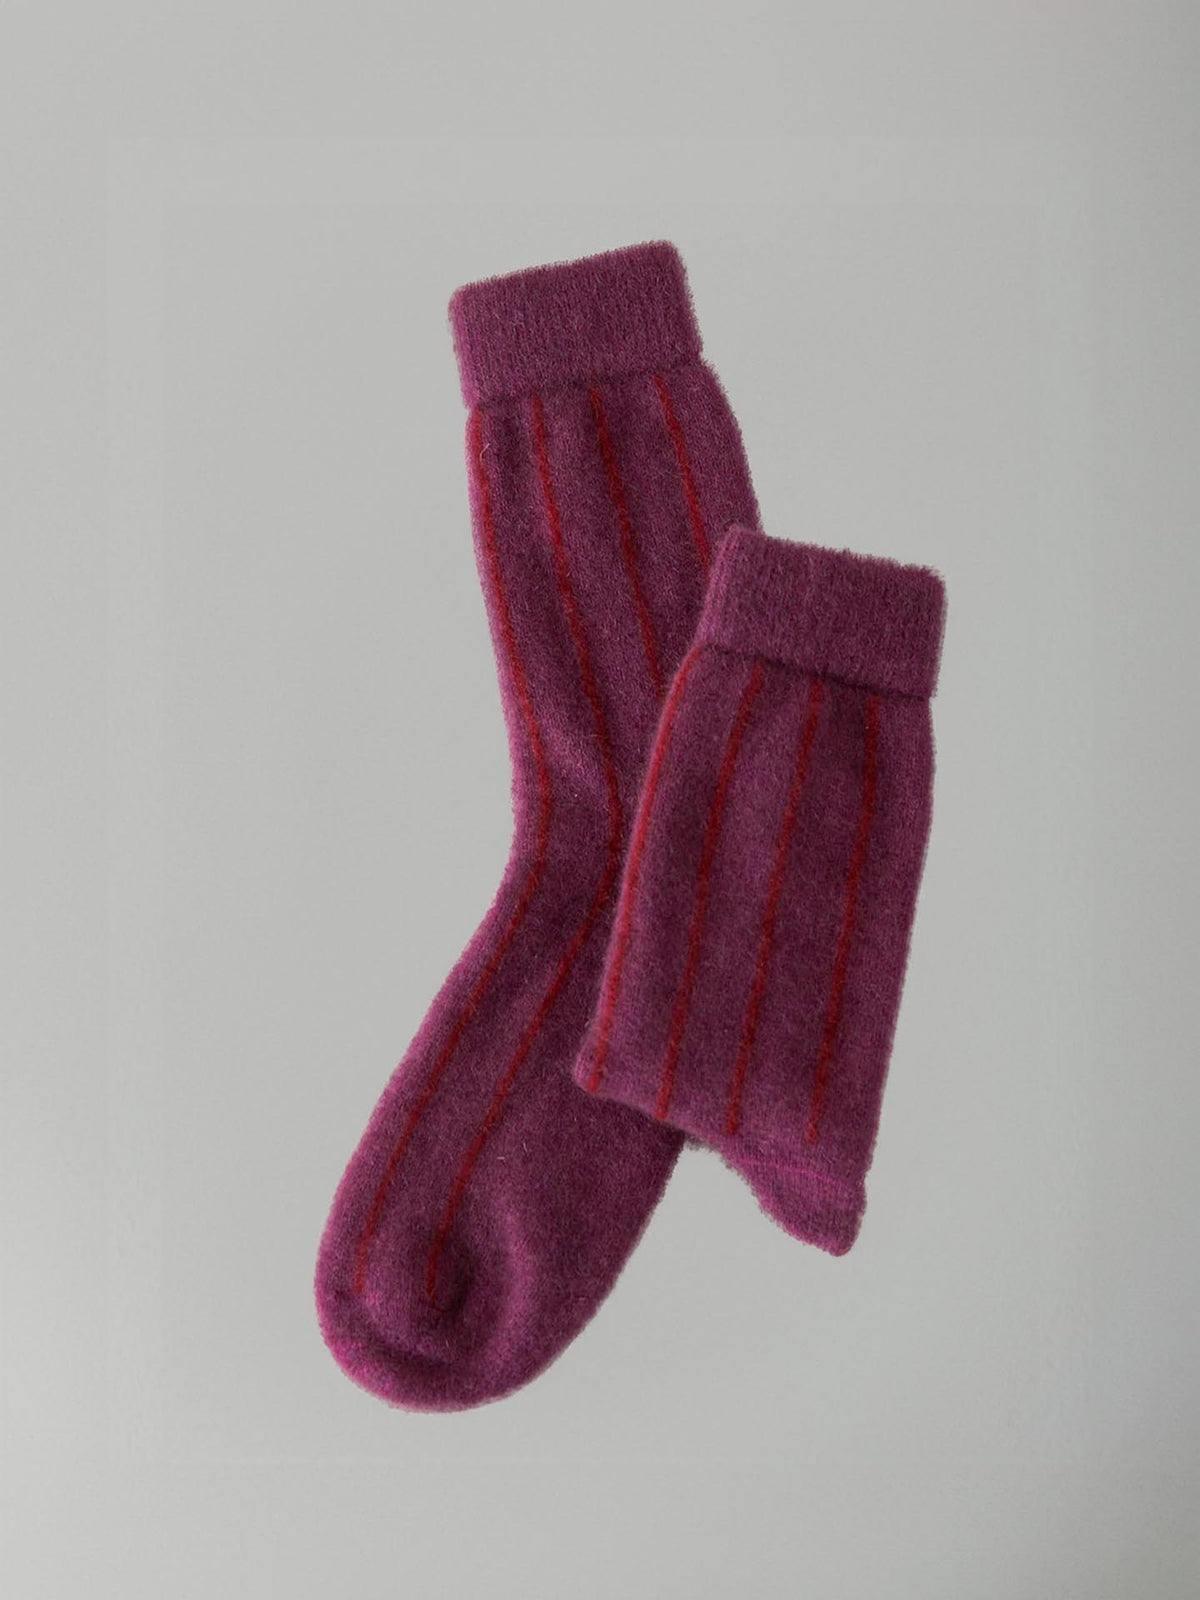 A pair of Possum Merino Socks - Orchid &amp; Poppy Stripe by Francie against a neutral background.